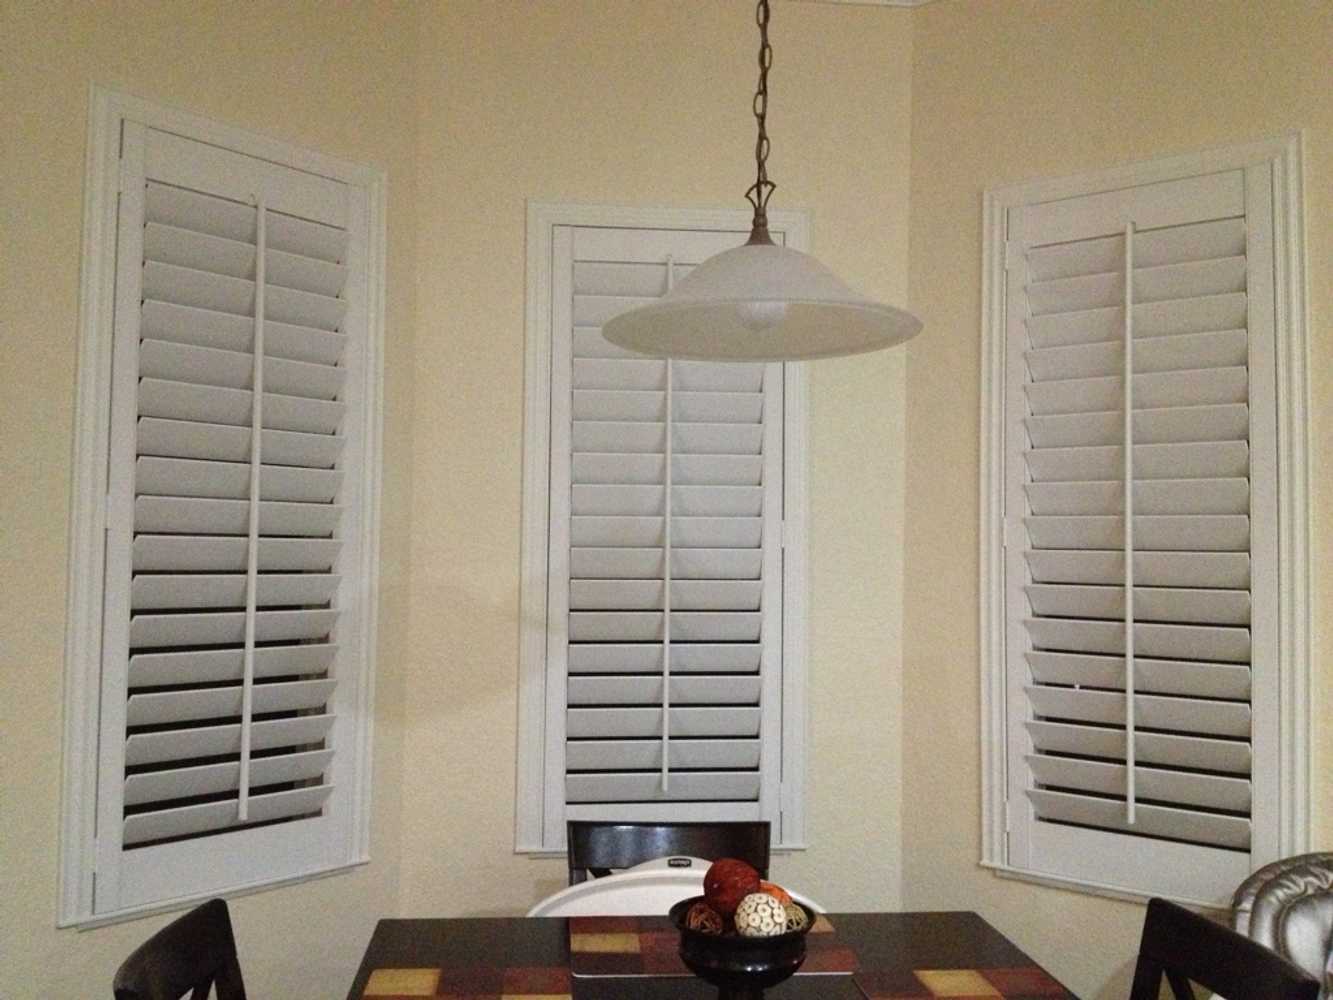 Project photos from Plantation Shutters of Florida